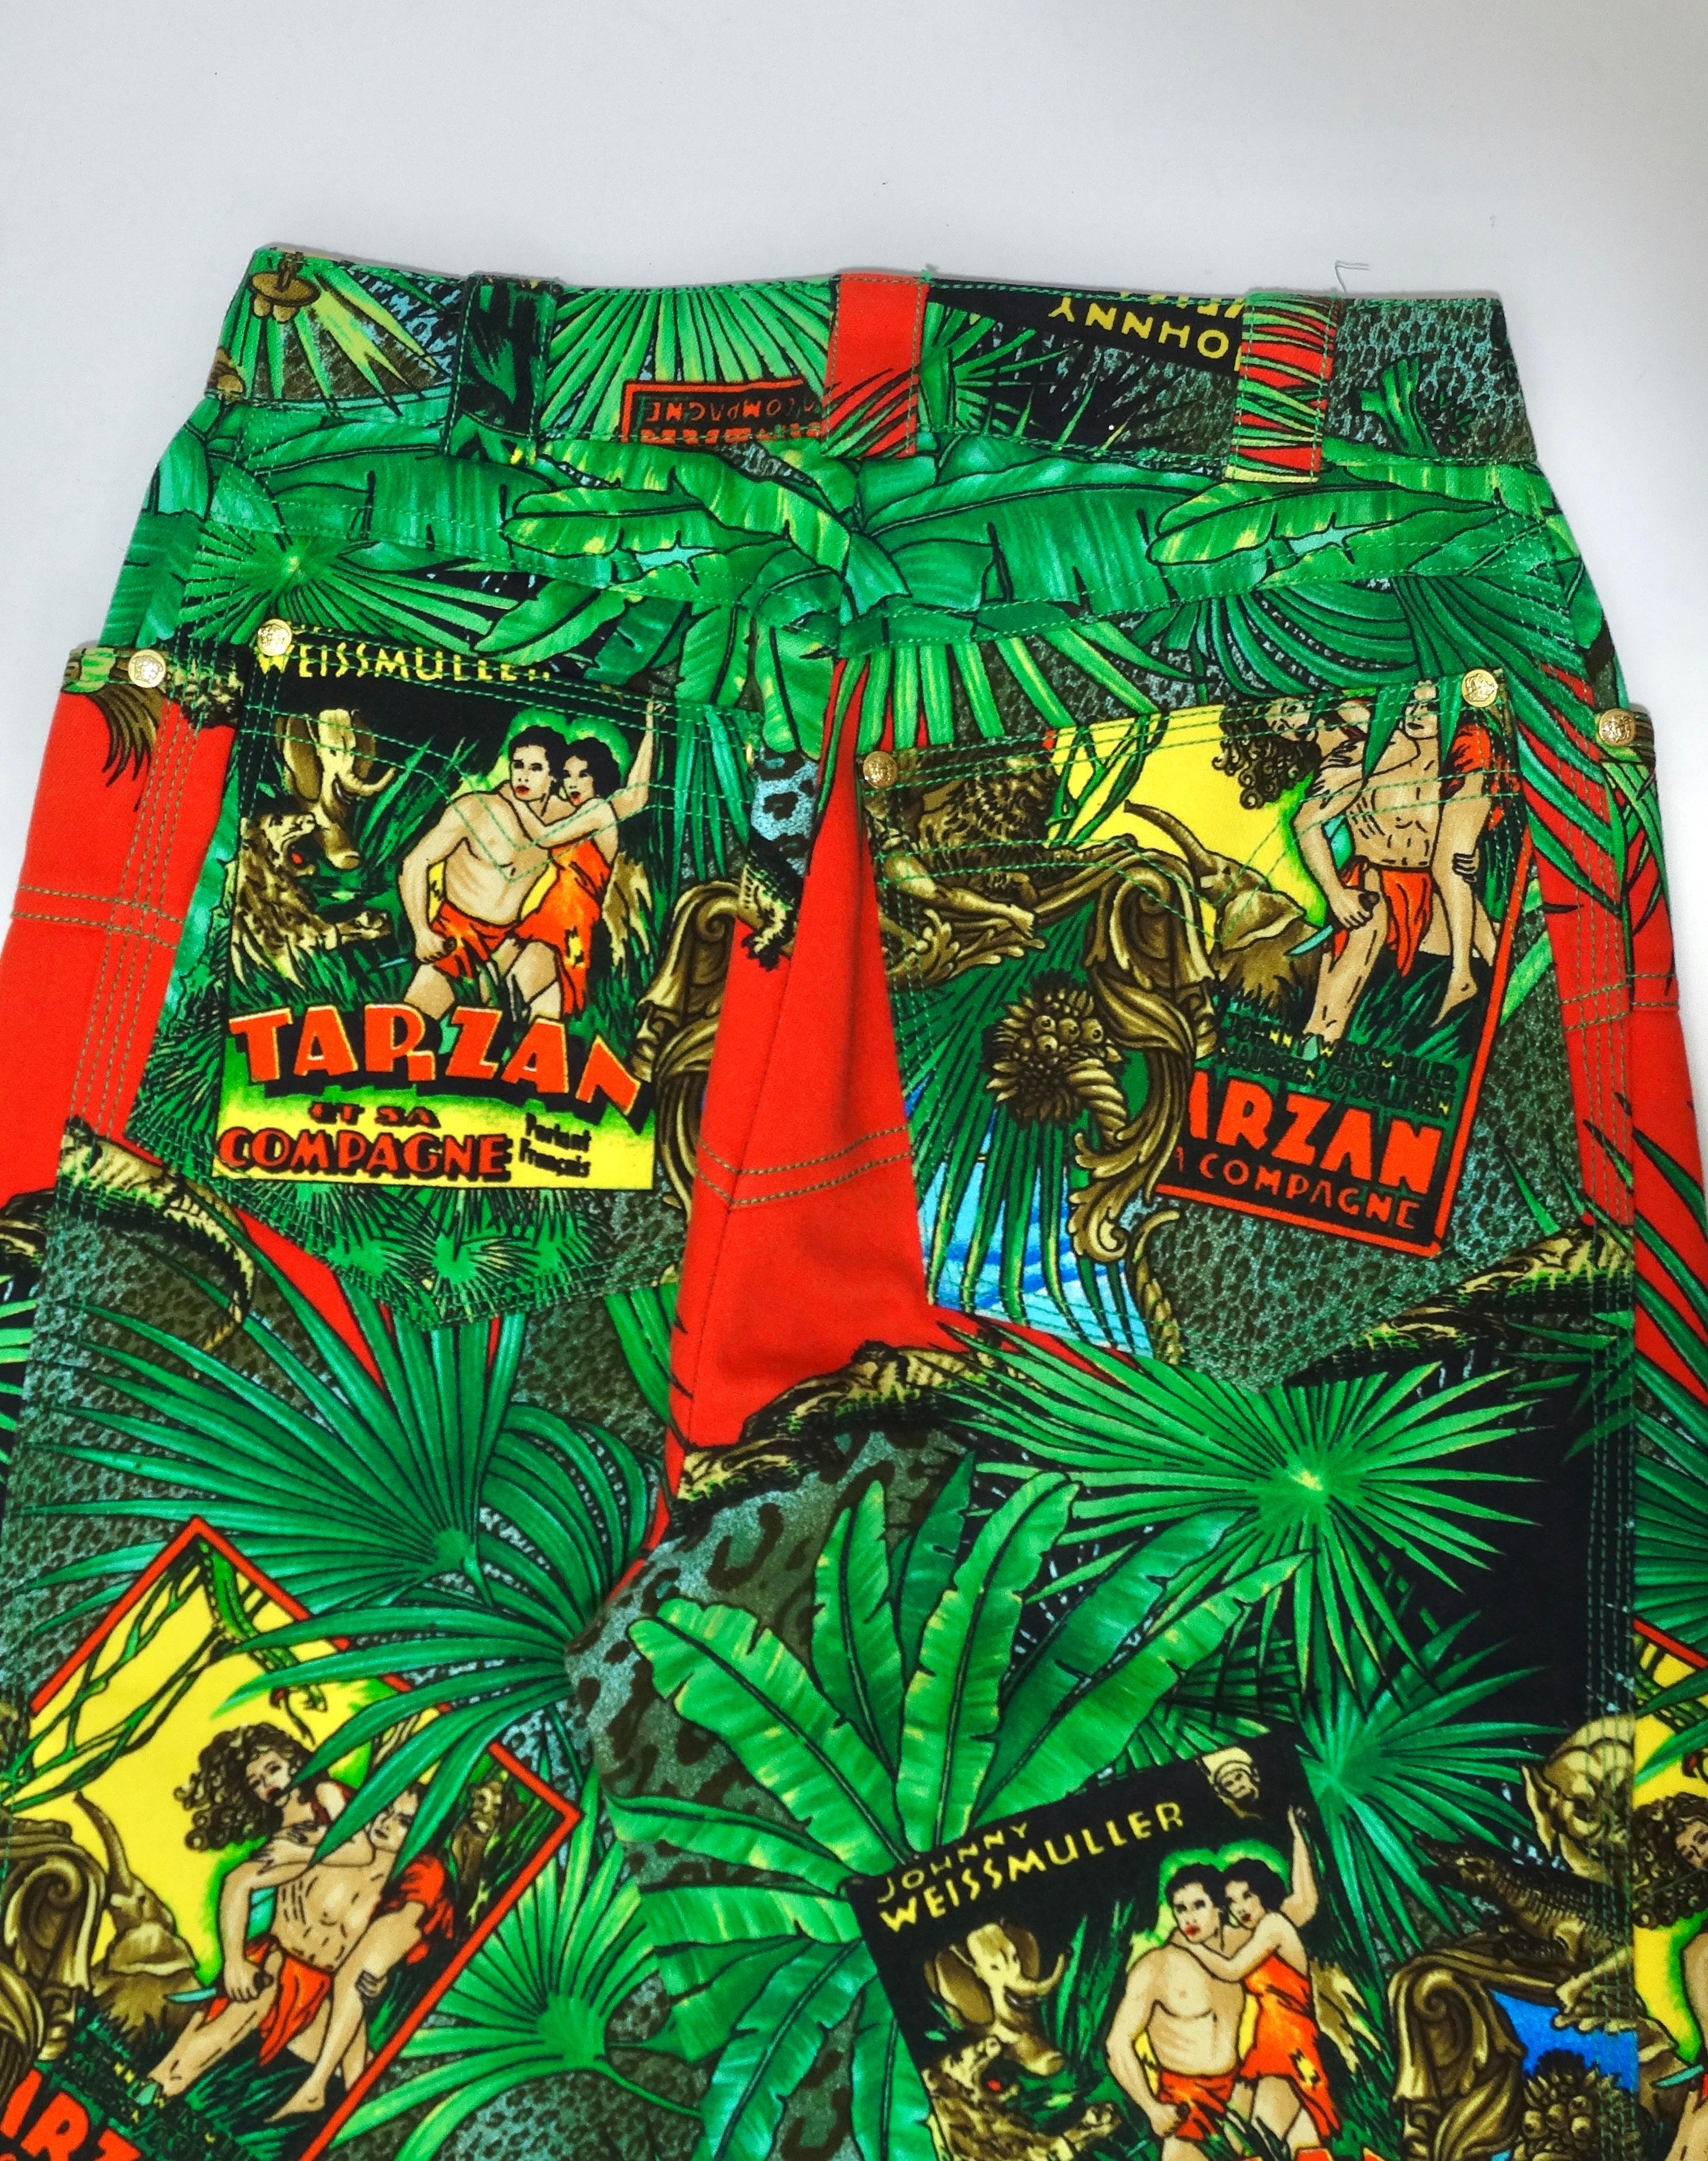  Versace 1990's Tarzan Print Jeans  In Excellent Condition For Sale In Scottsdale, AZ